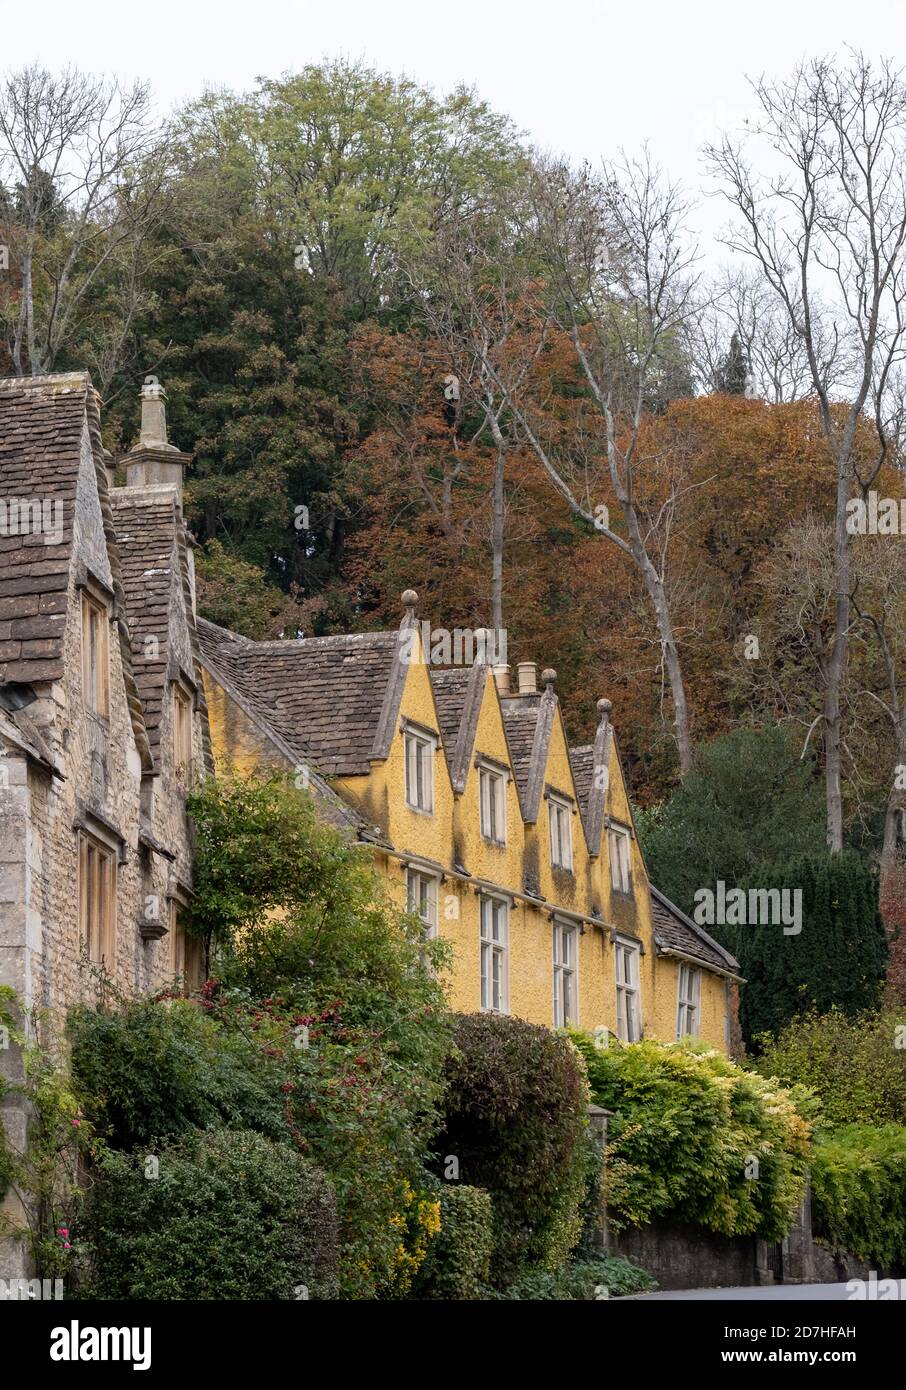 Characterful, historic houses in Castle Combe, picturesque village in Wiltshire in the Cotswolds, Gloucestershire UK. Photographed in autumn. Stock Photo